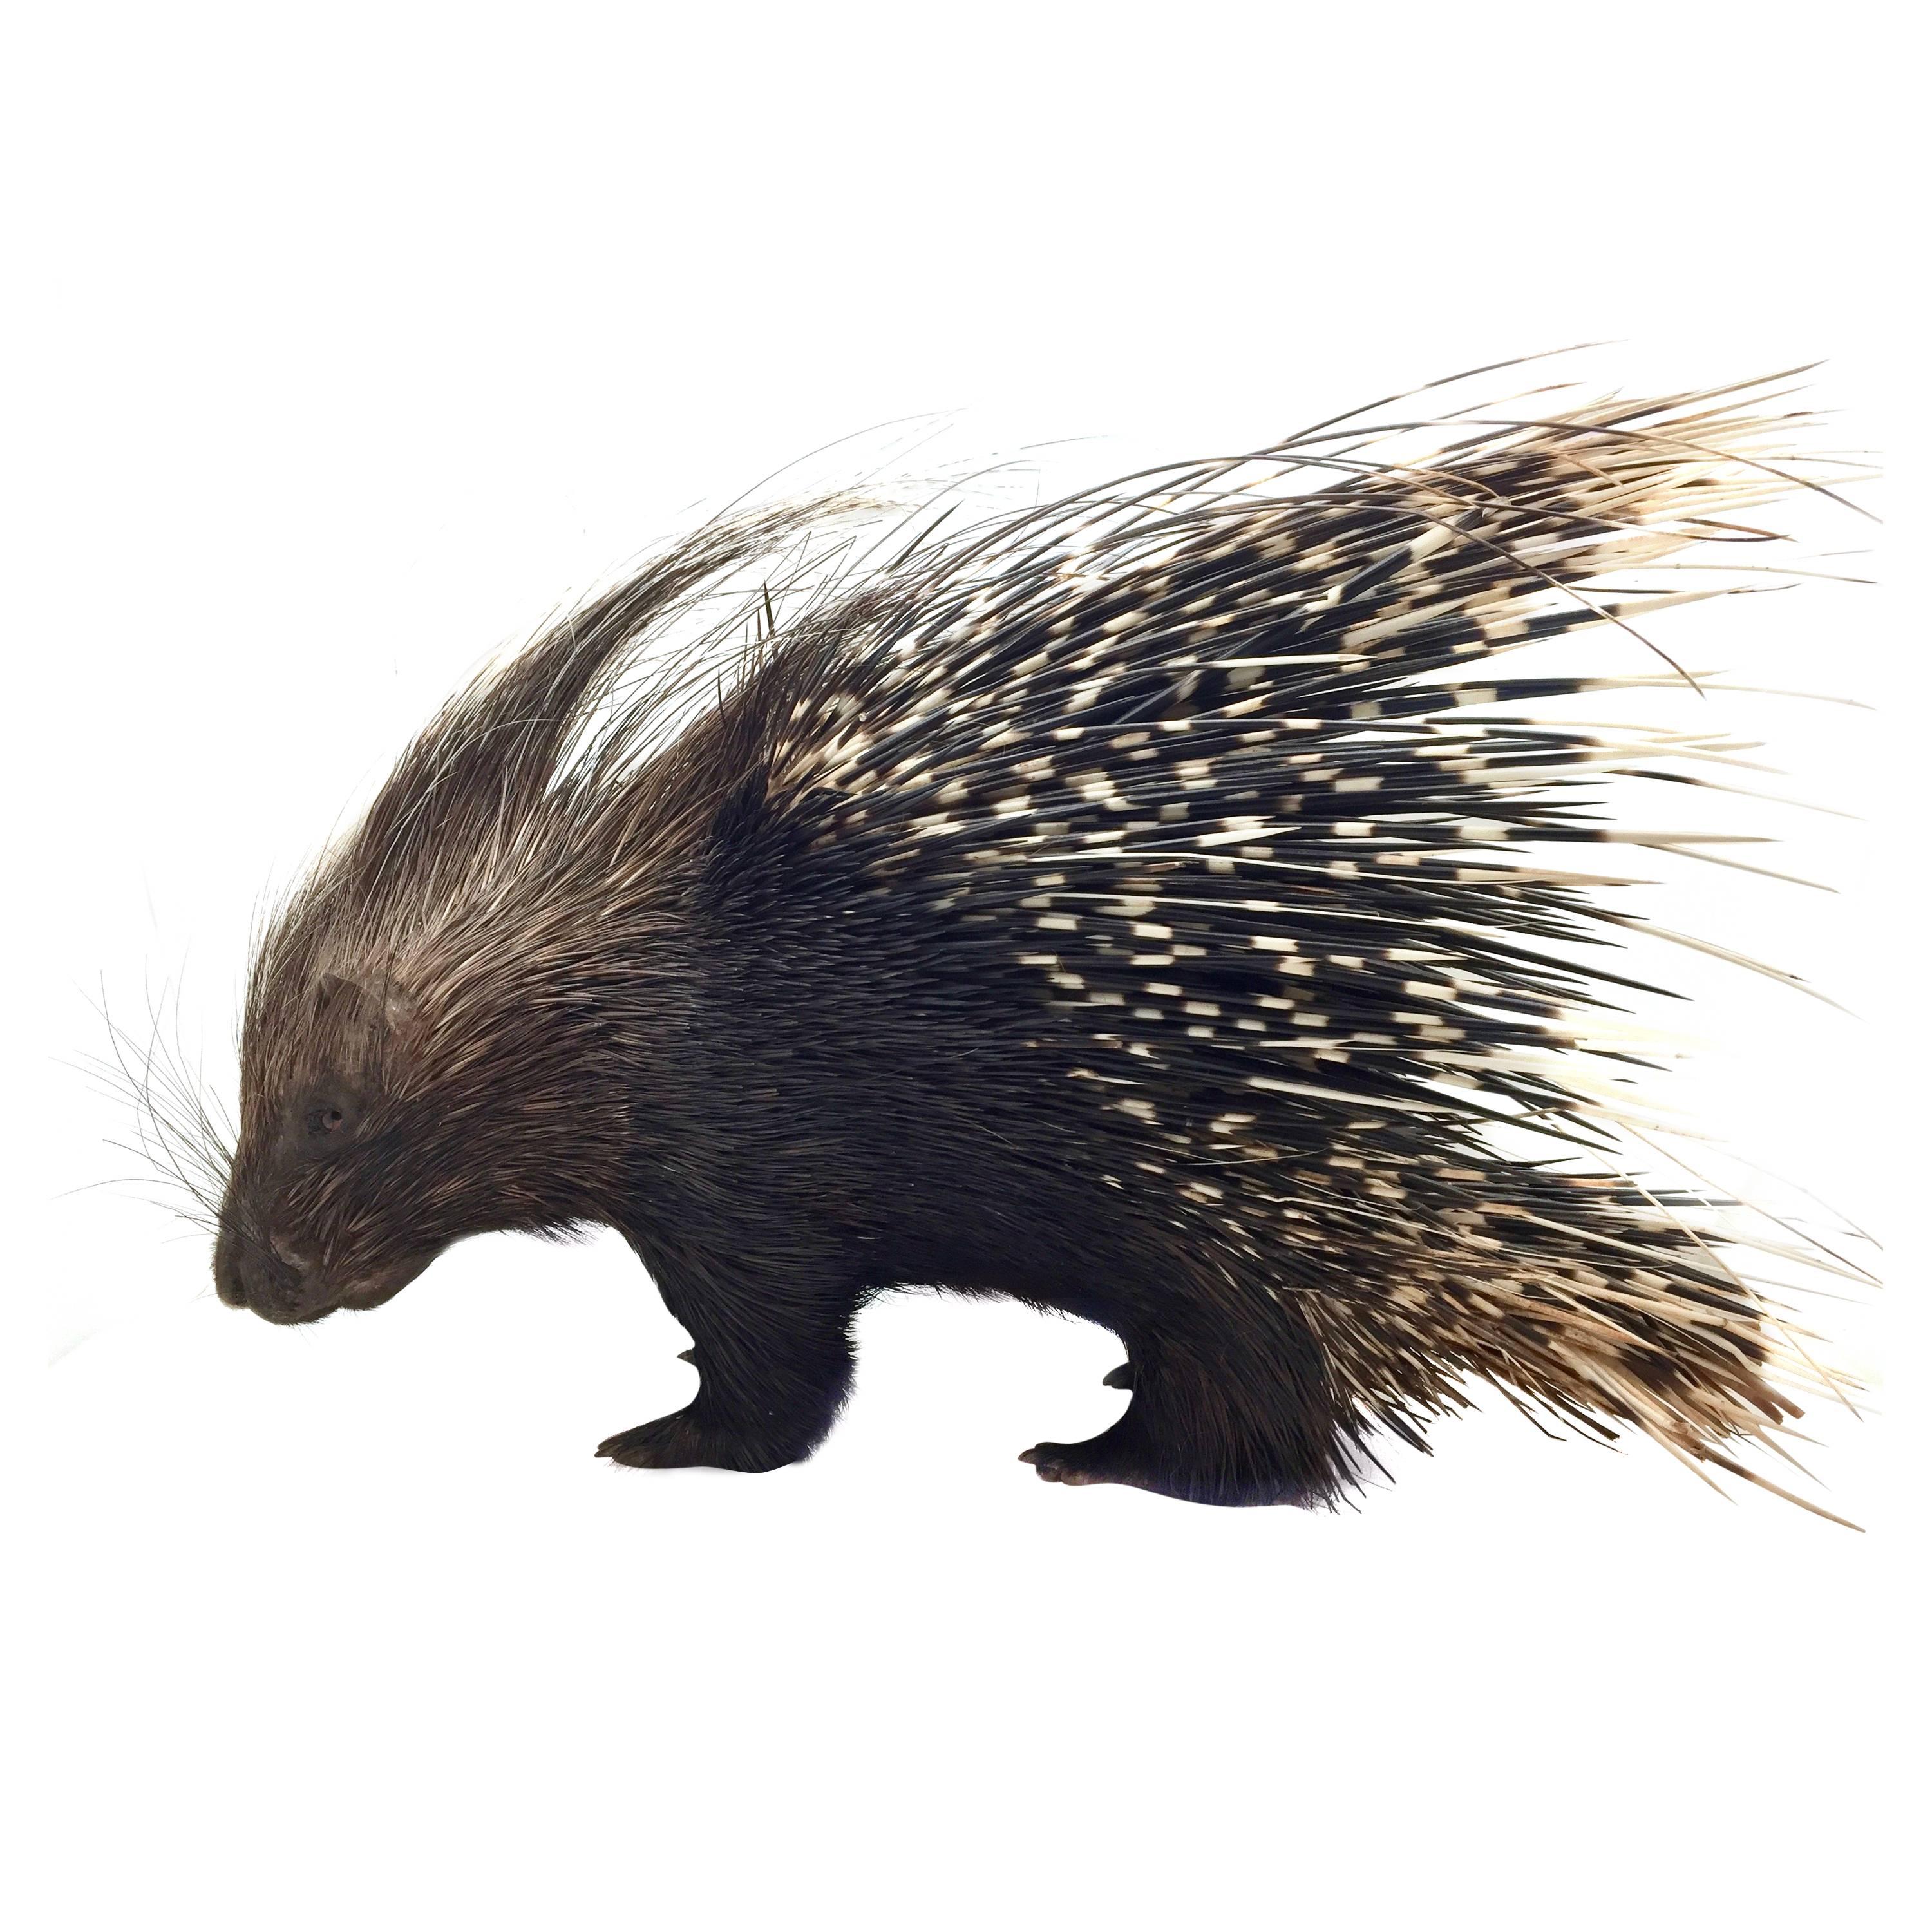 Large South African Crested Porcupine or Hystrix Cristata